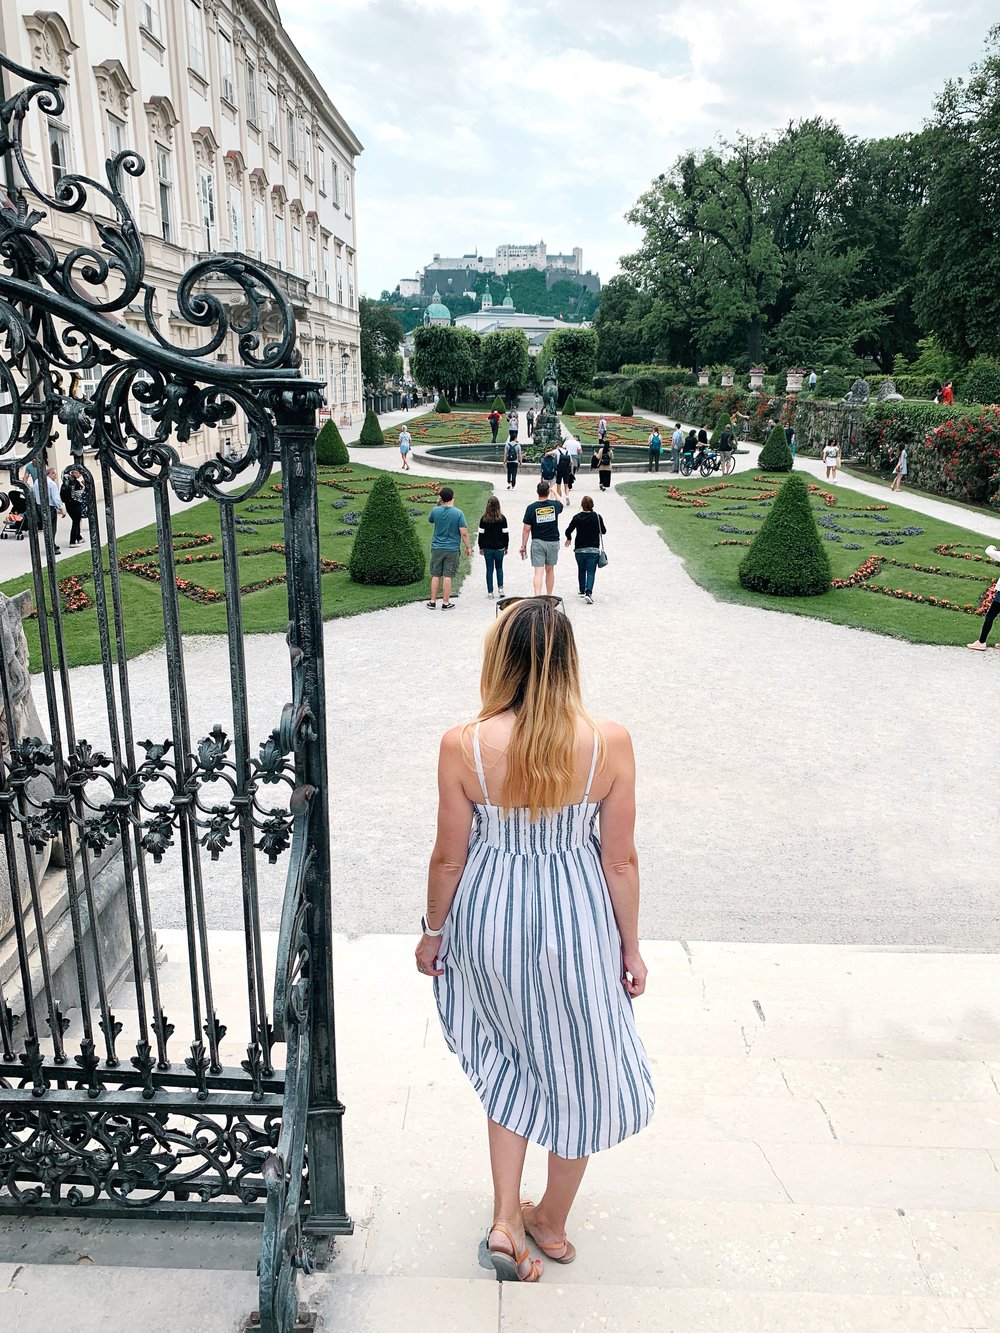 Mirabell Palace Gardens - Famous Sound of Music Tour Spot | Merry + Grace